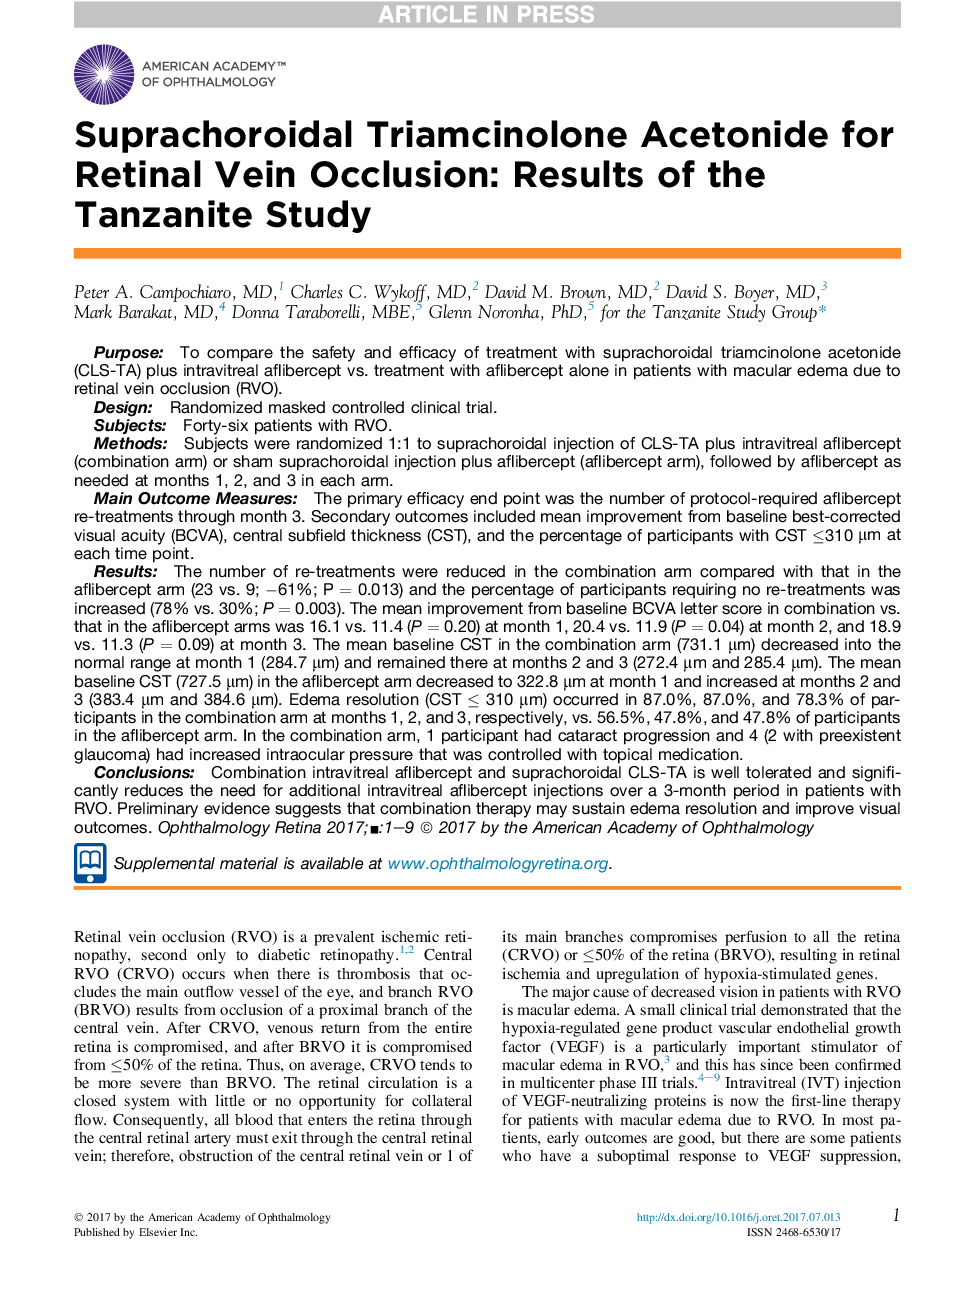 Suprachoroidal Triamcinolone Acetonide for Retinal Vein Occlusion: Results of the Tanzanite Study